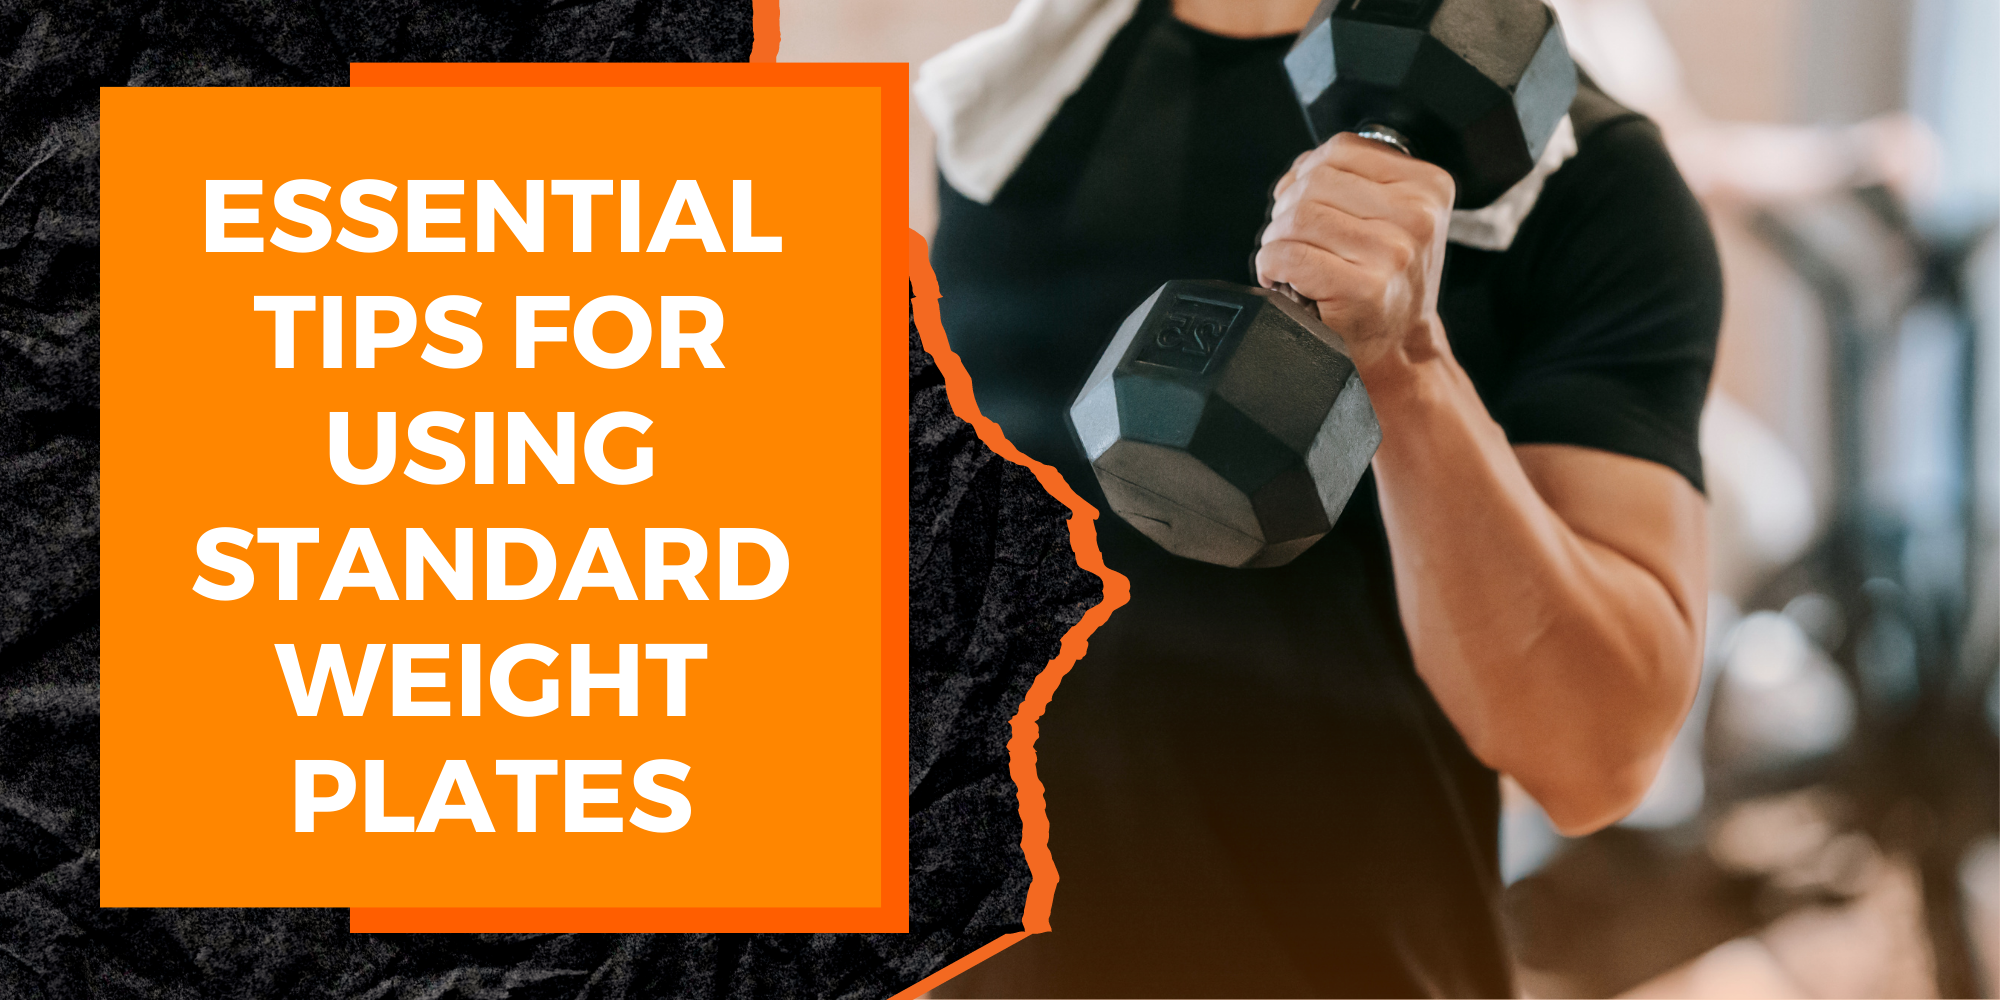 Essential Tips for Using Standard Weight Plates